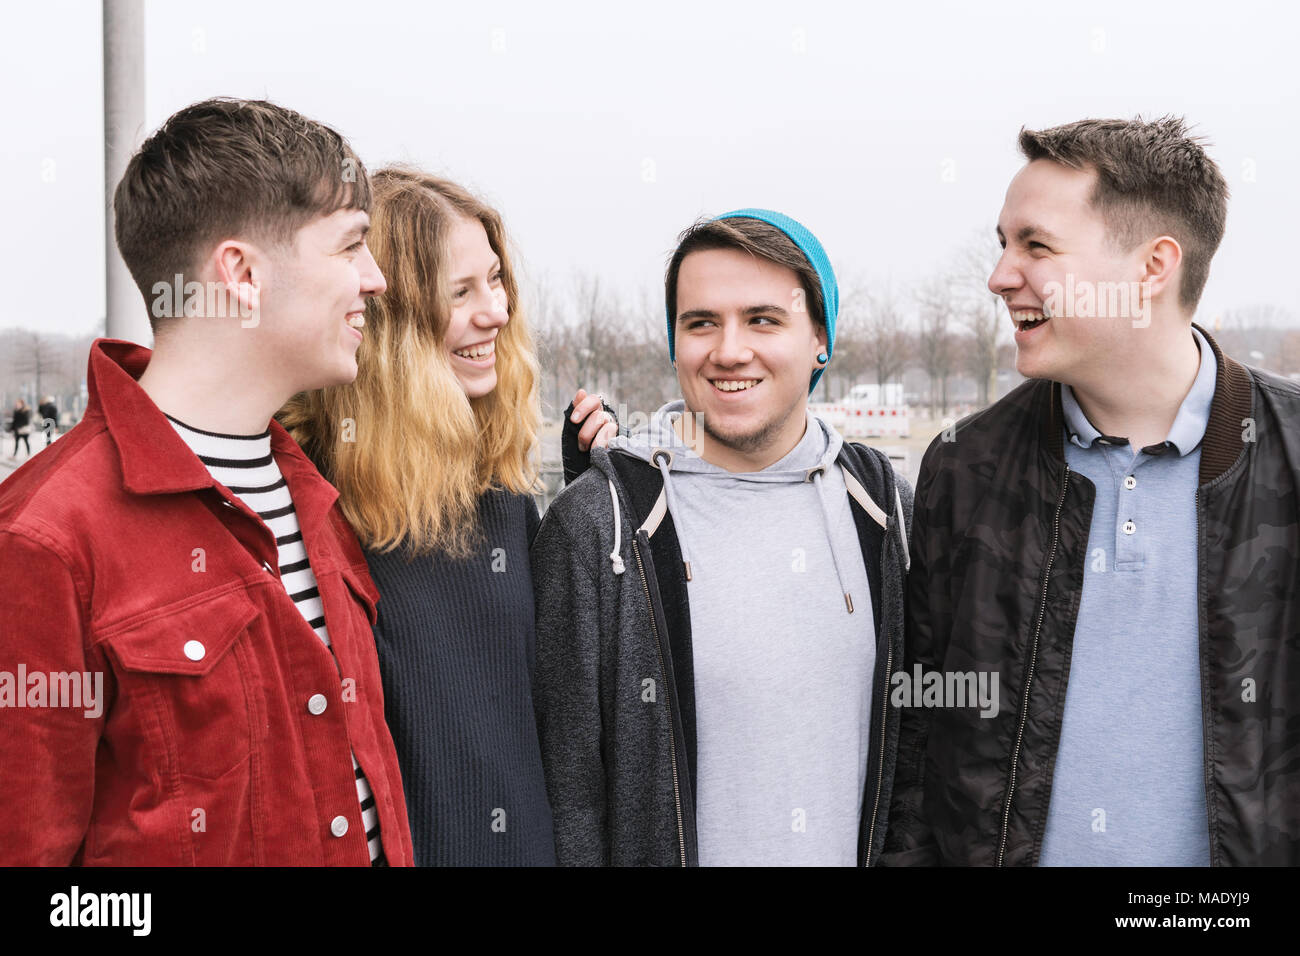 group of young friends having fun and laughing together Stock Photo